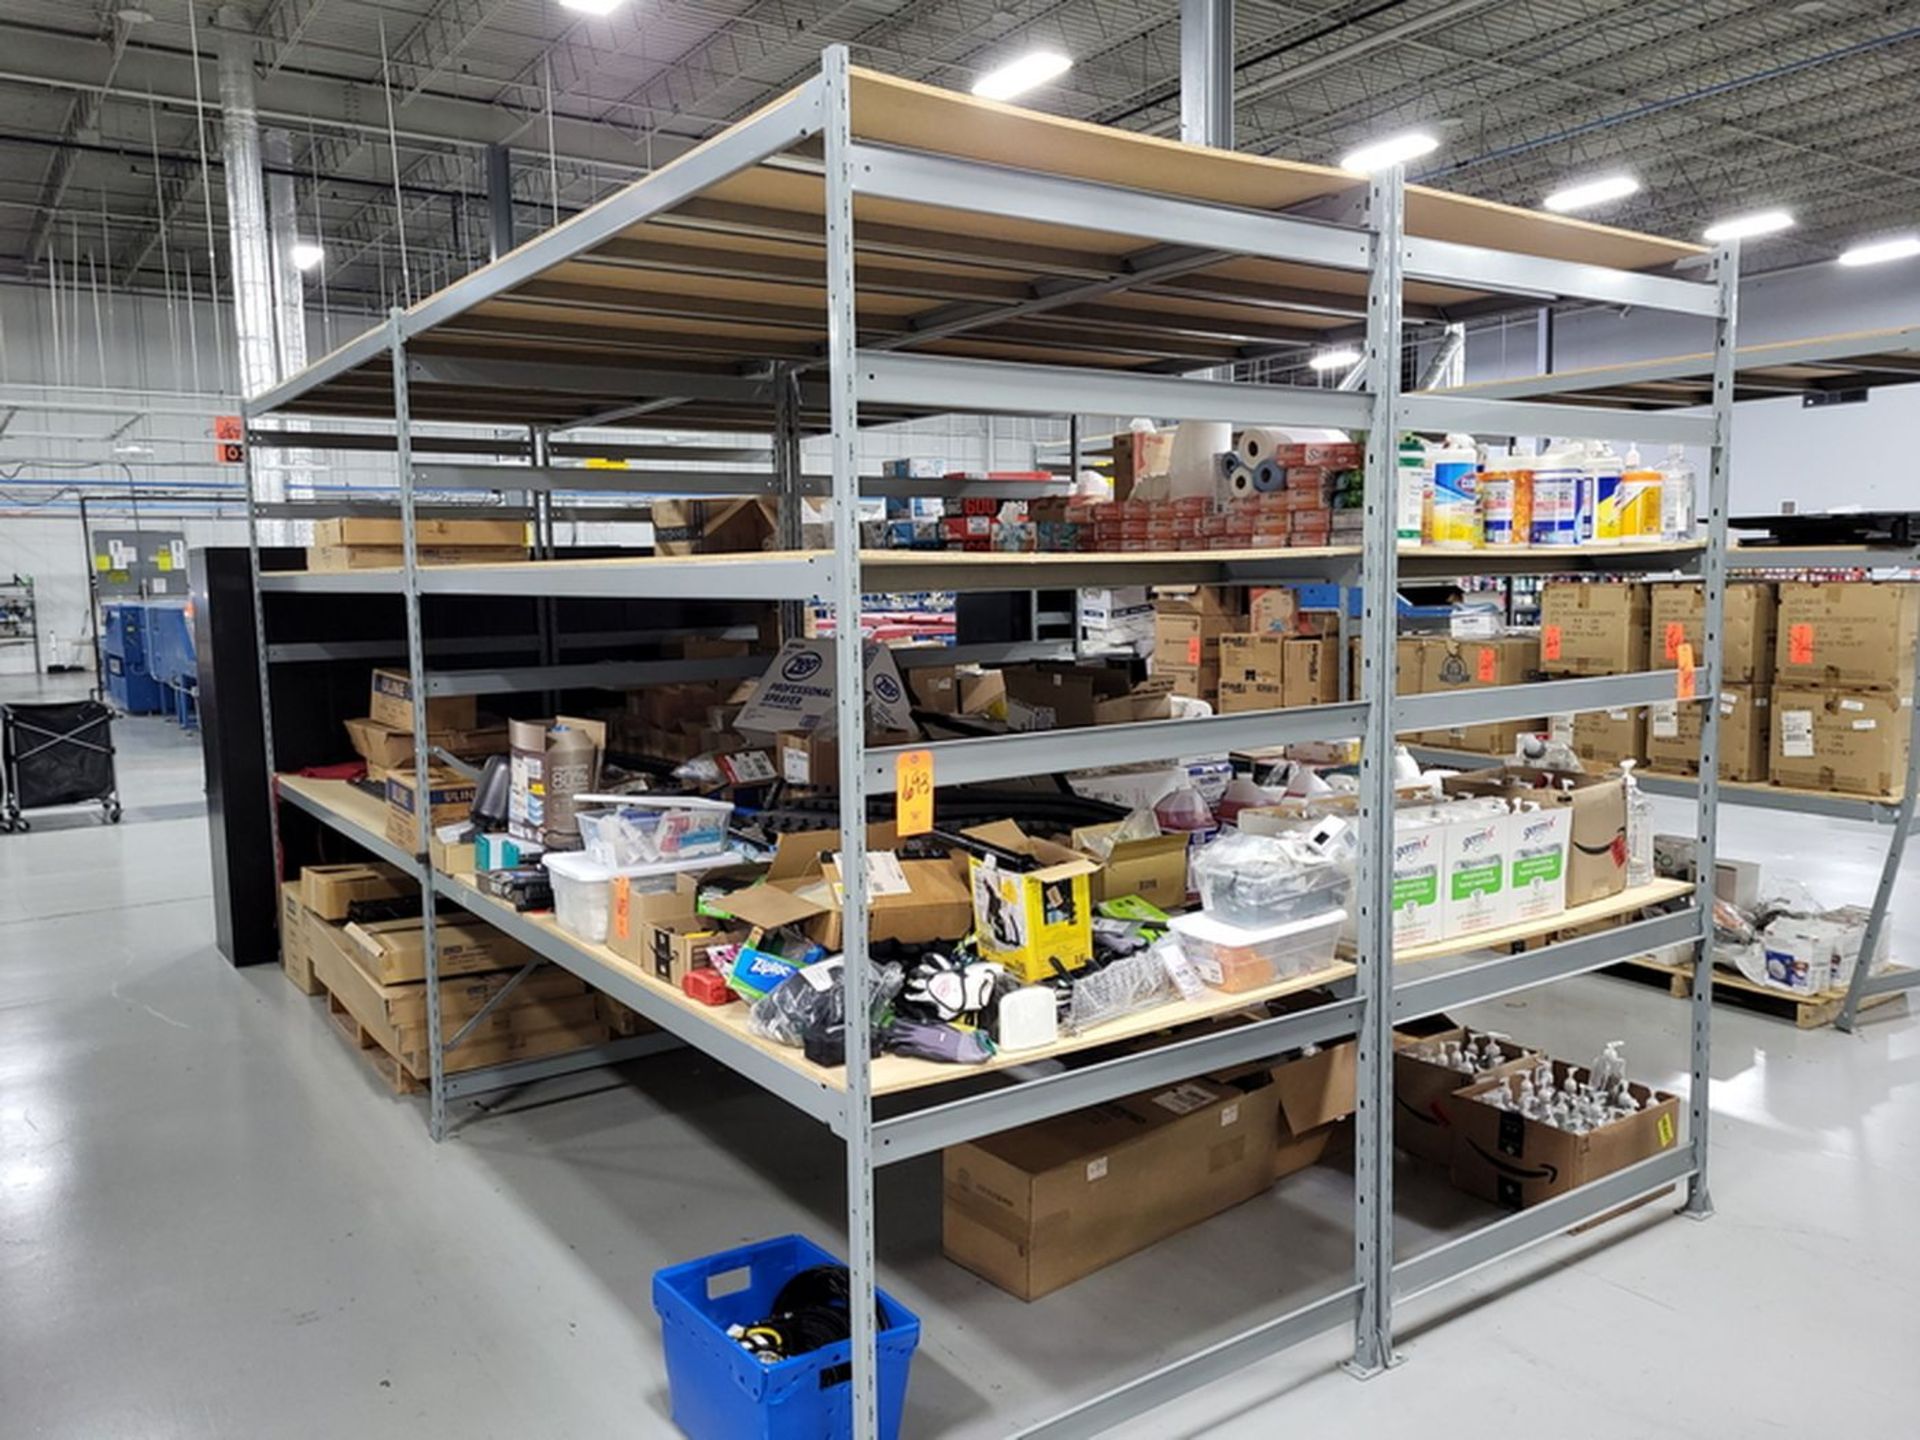 Lot - (4) Sections of Light Duty Shelving; 8 ft. x 48 in. x 8 ft. high, Configured as 2-Sections